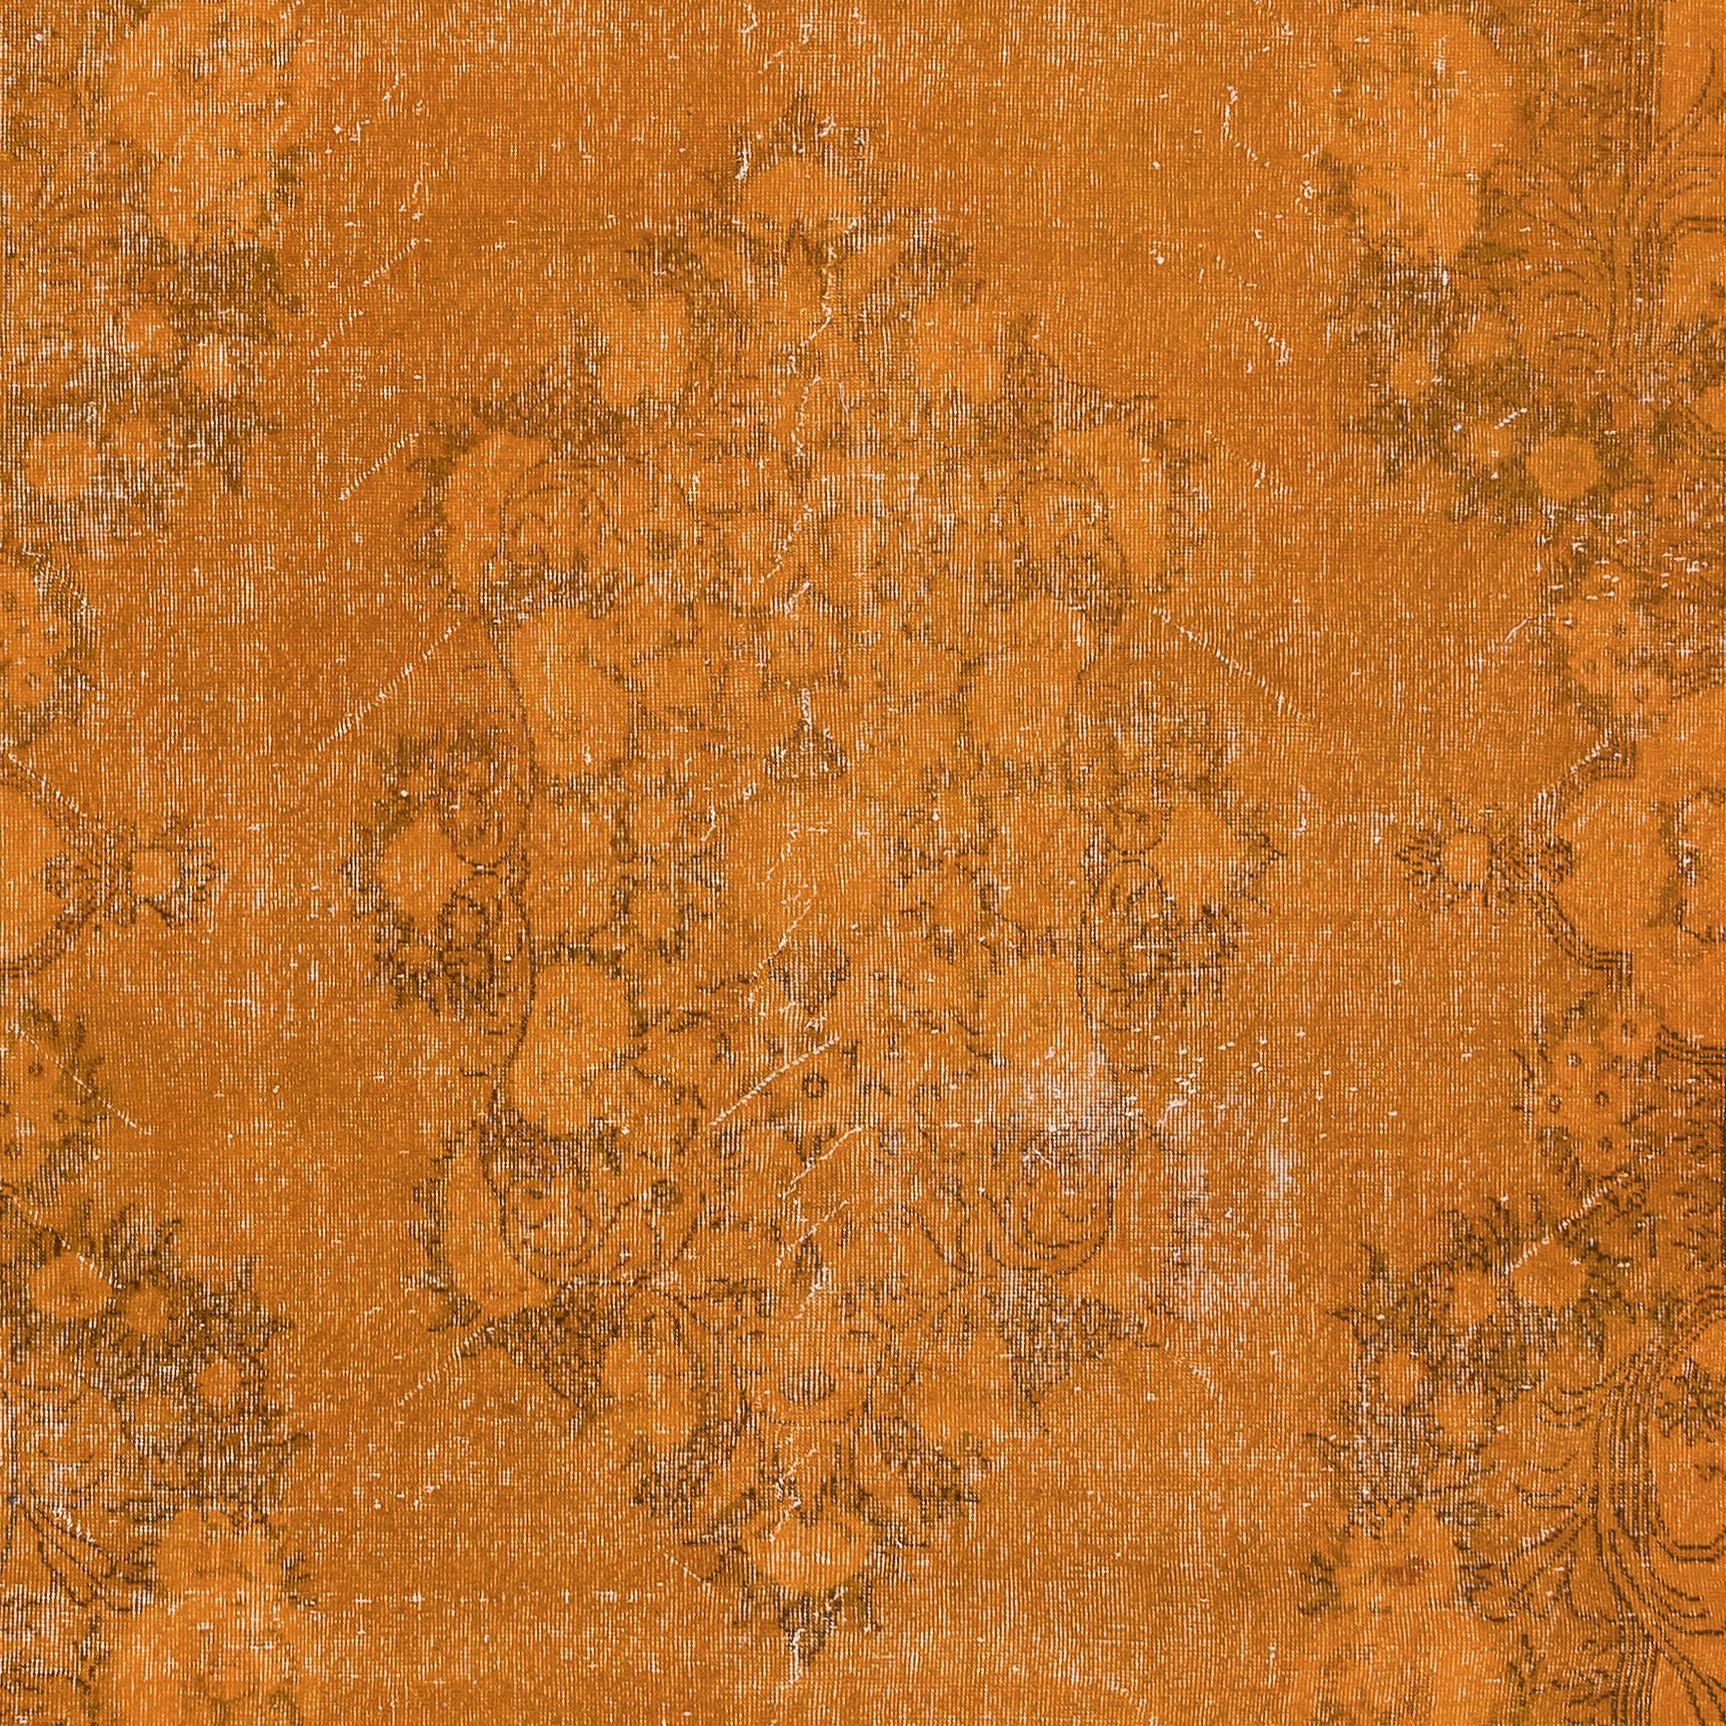 Modern 6.8x10.6 Ft One-of-a-kind Wool Area Rug in Orange, Handknotted in Turkey For Sale